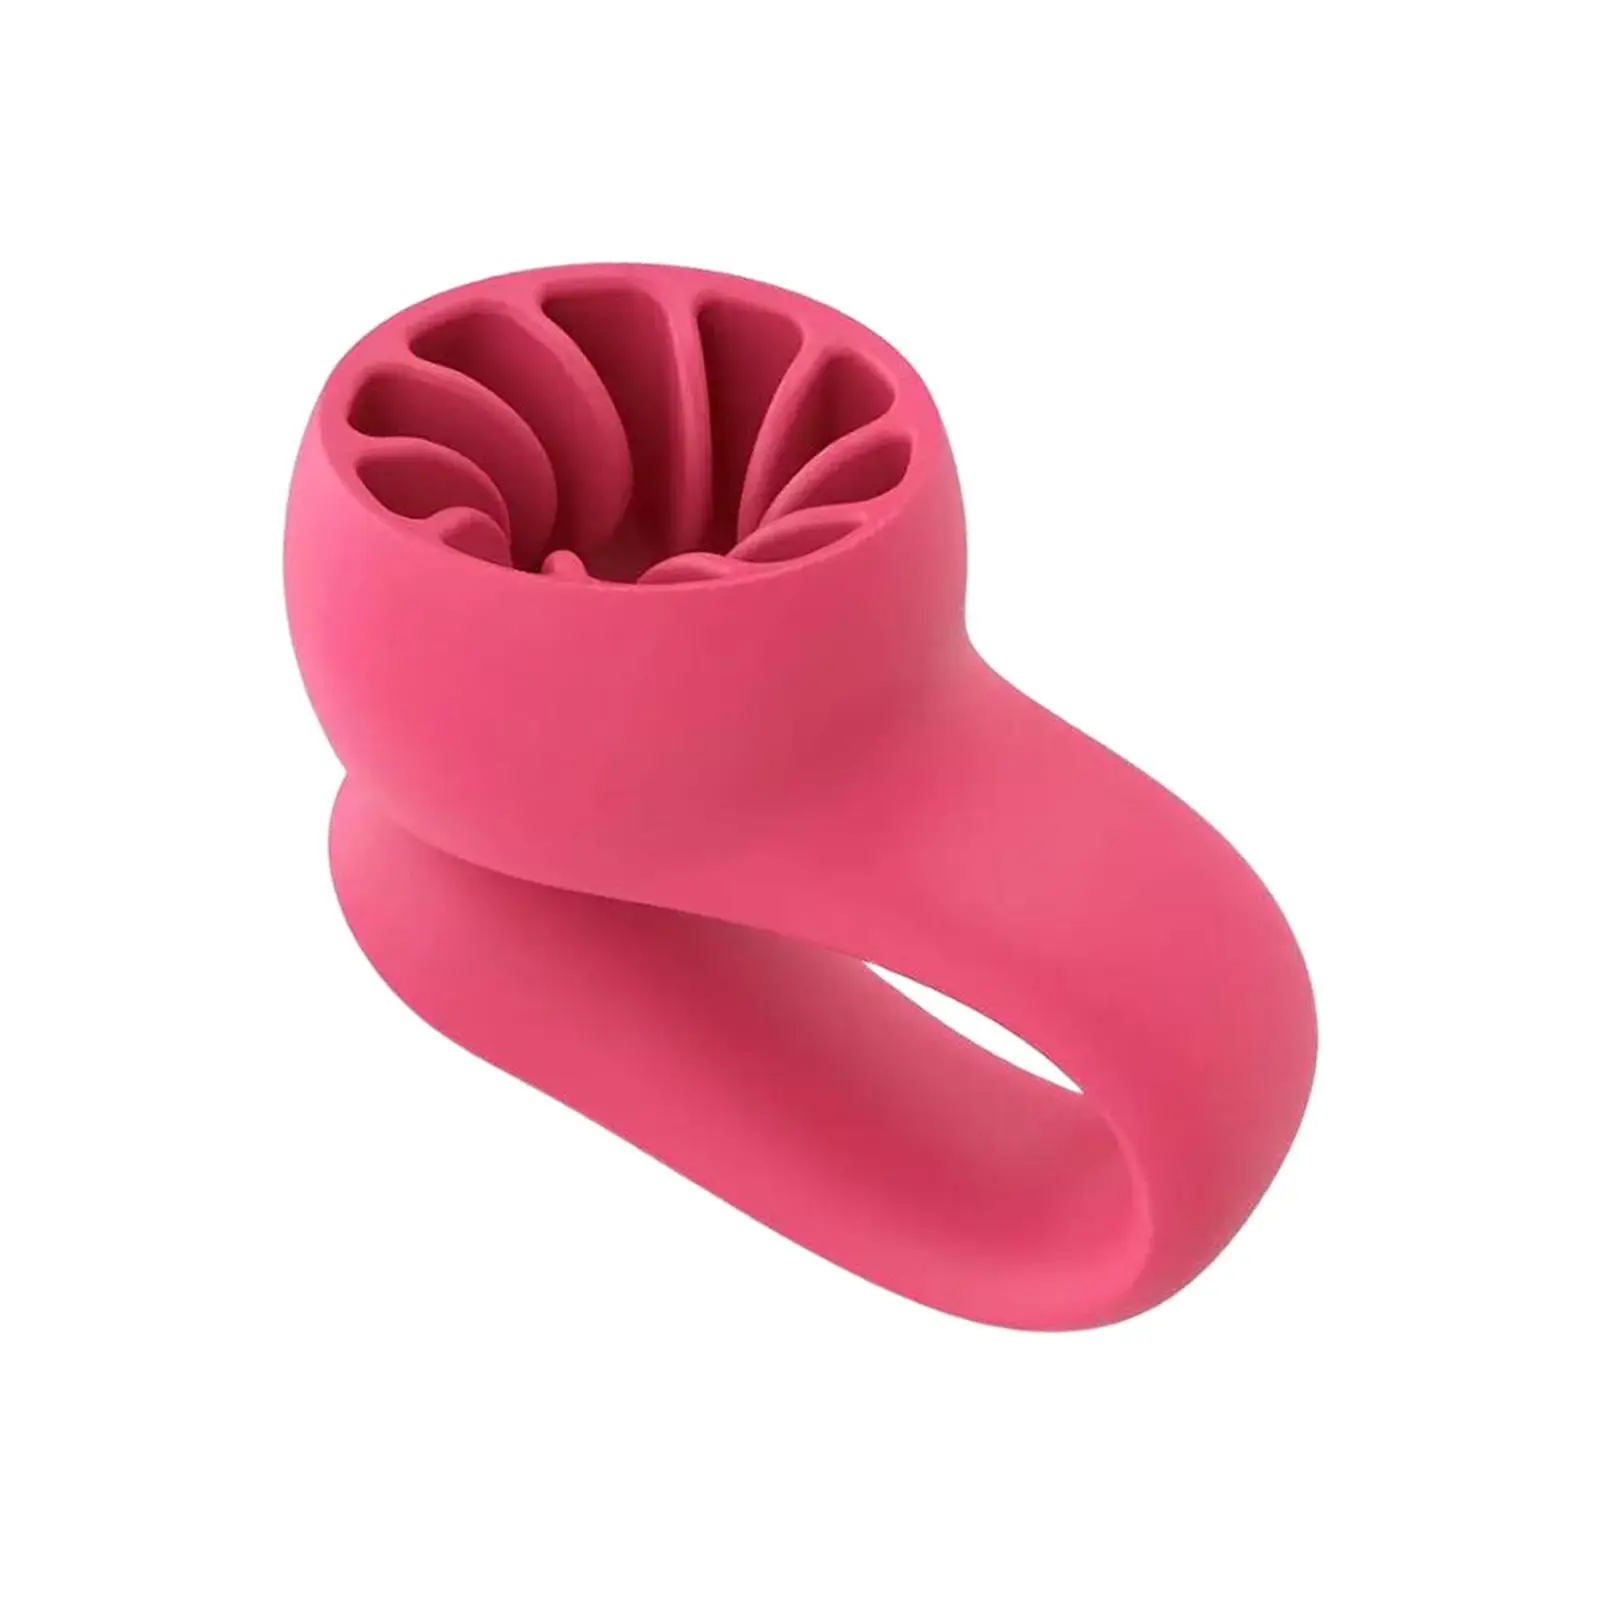 Wearable Nail Polish Holder, Nail Polish Stand,, Portable Nail Polish Accessories for Manicure and Pedicure